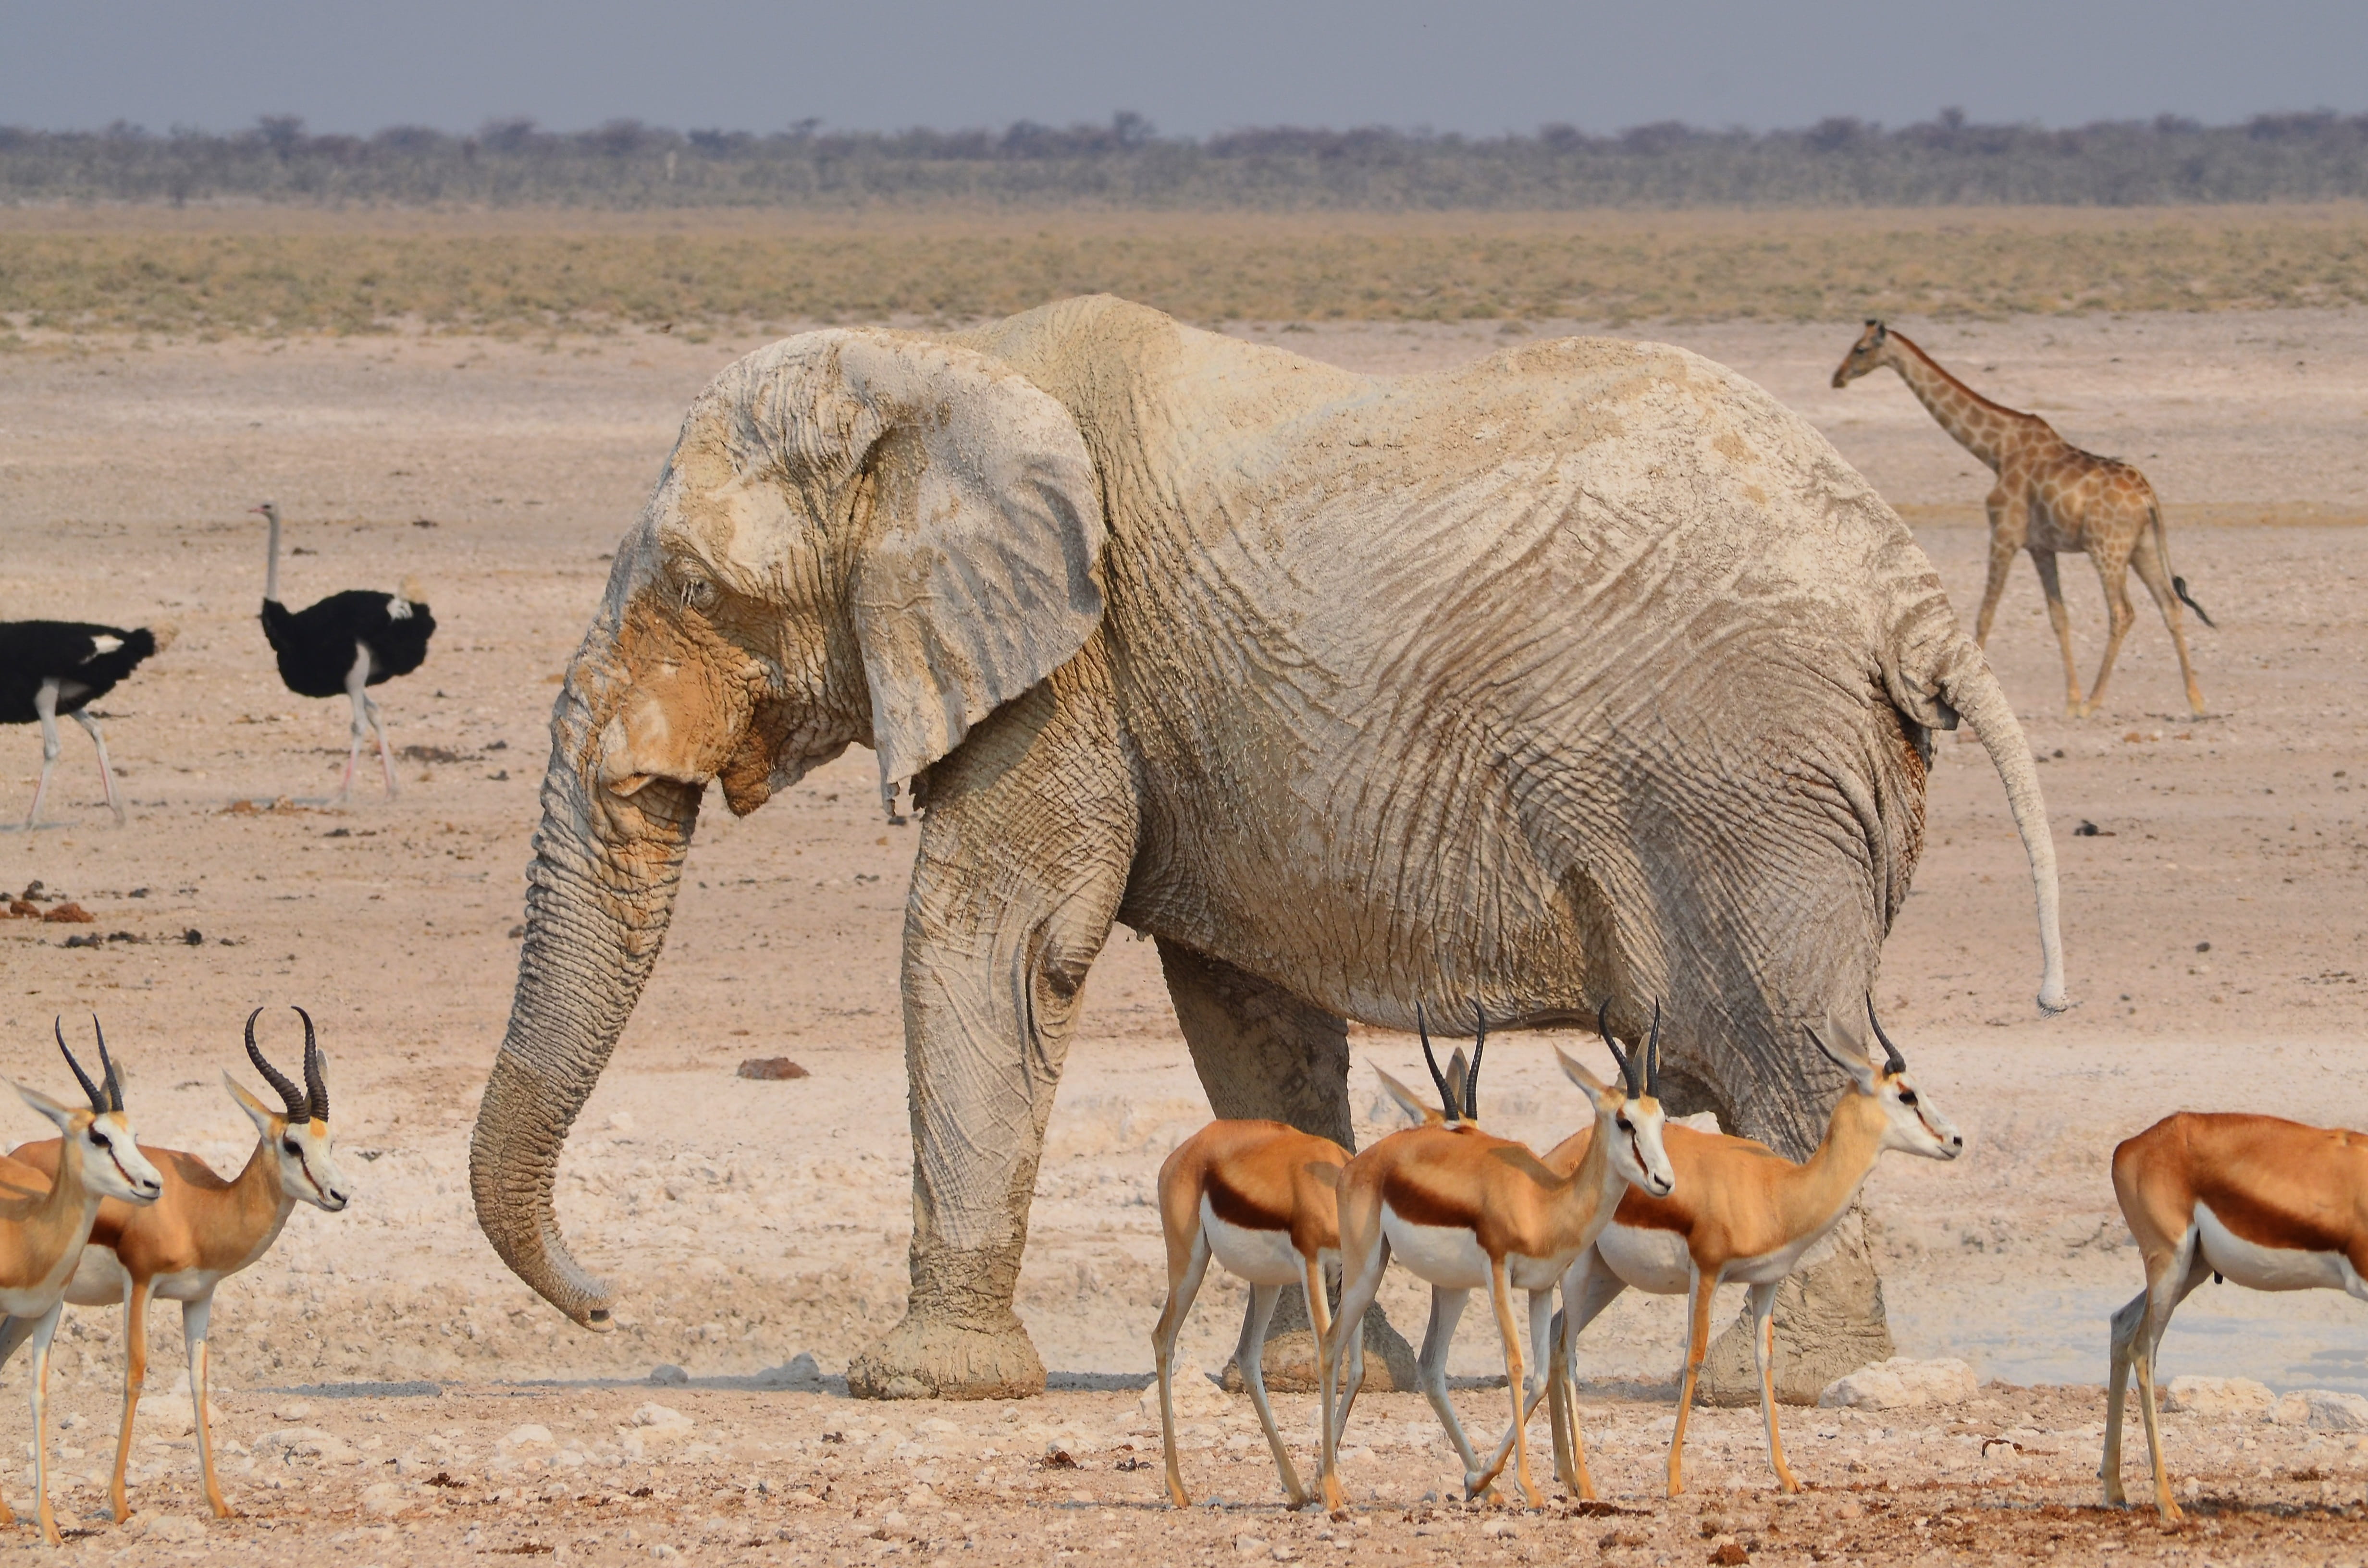 Photograph of animals. 1 elephant, much bigger than the other animals, 3 kinds of animals, more deer than birds.